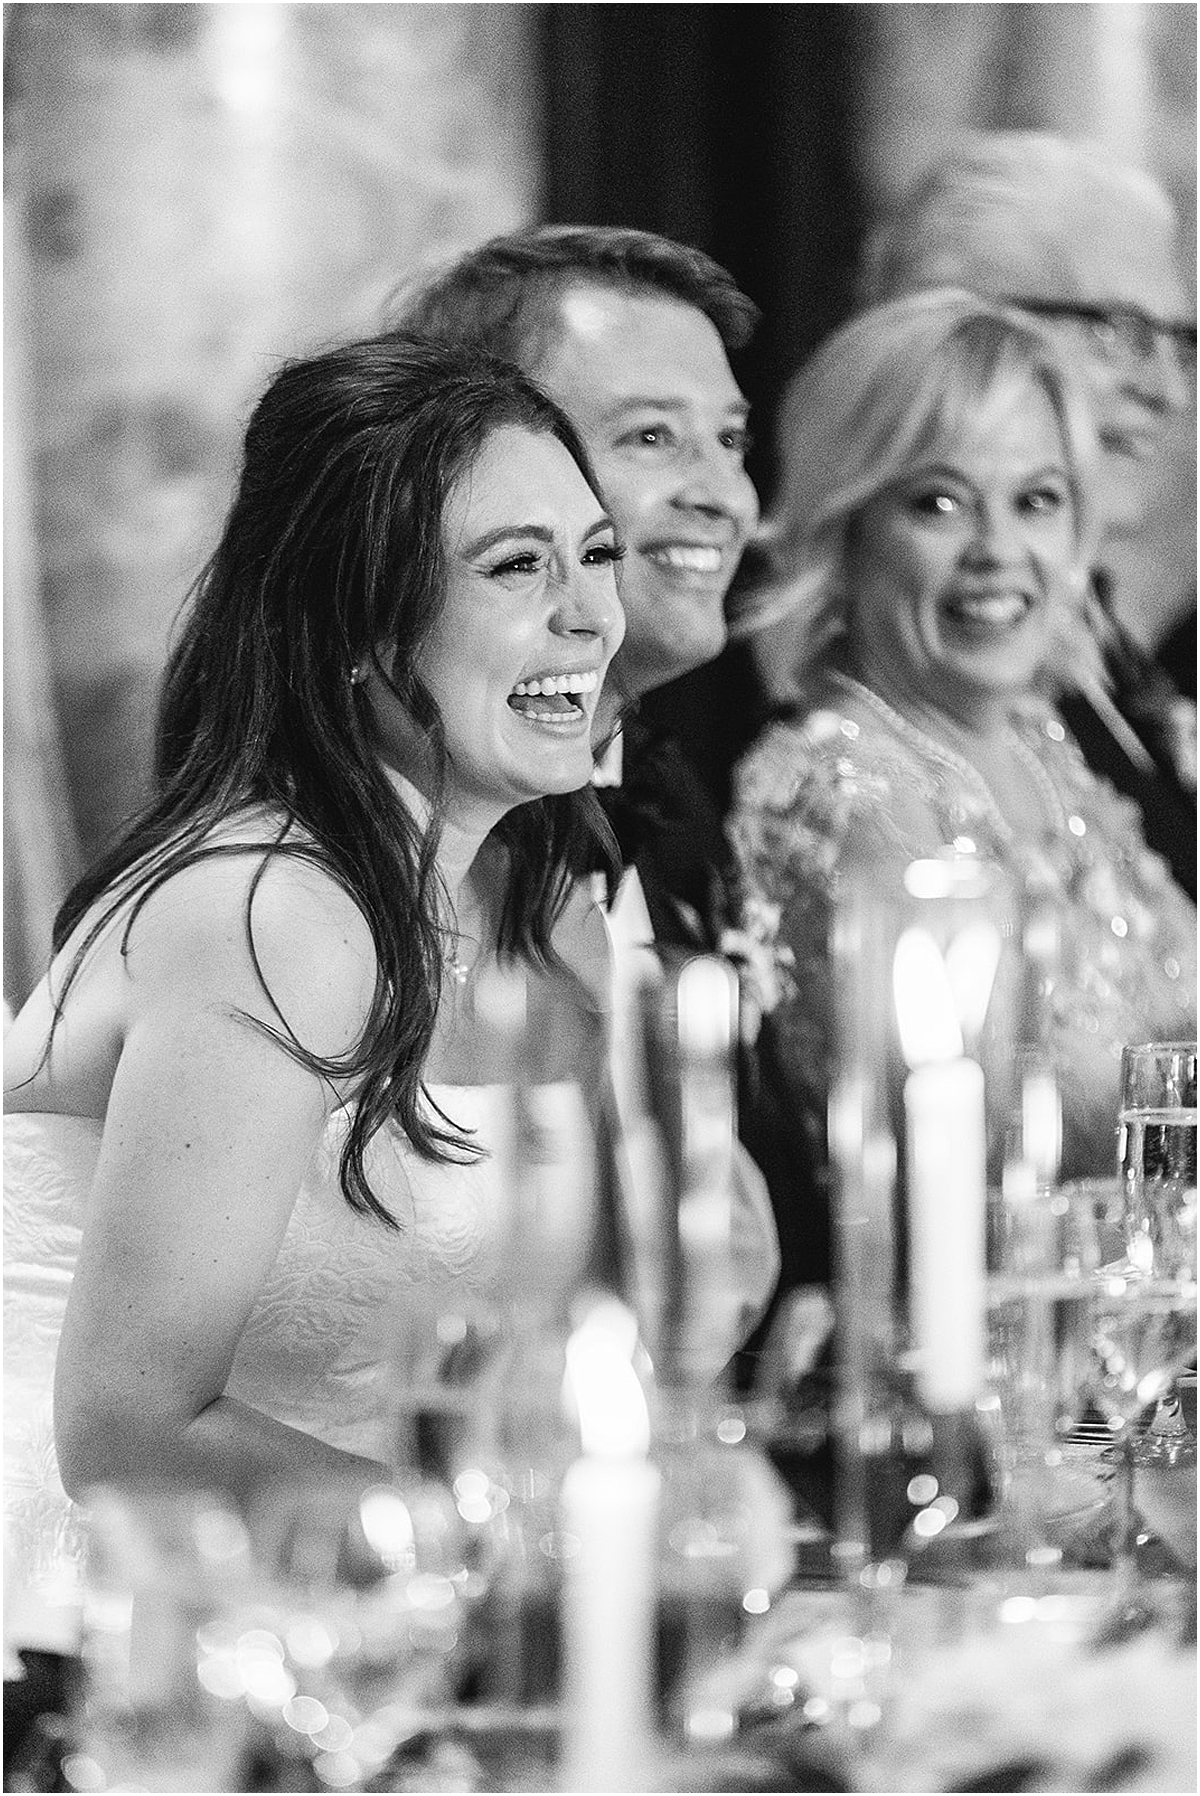 candid reactions during wedding toast at Elegant Chicago Winter Wedding at The Drake Hotel